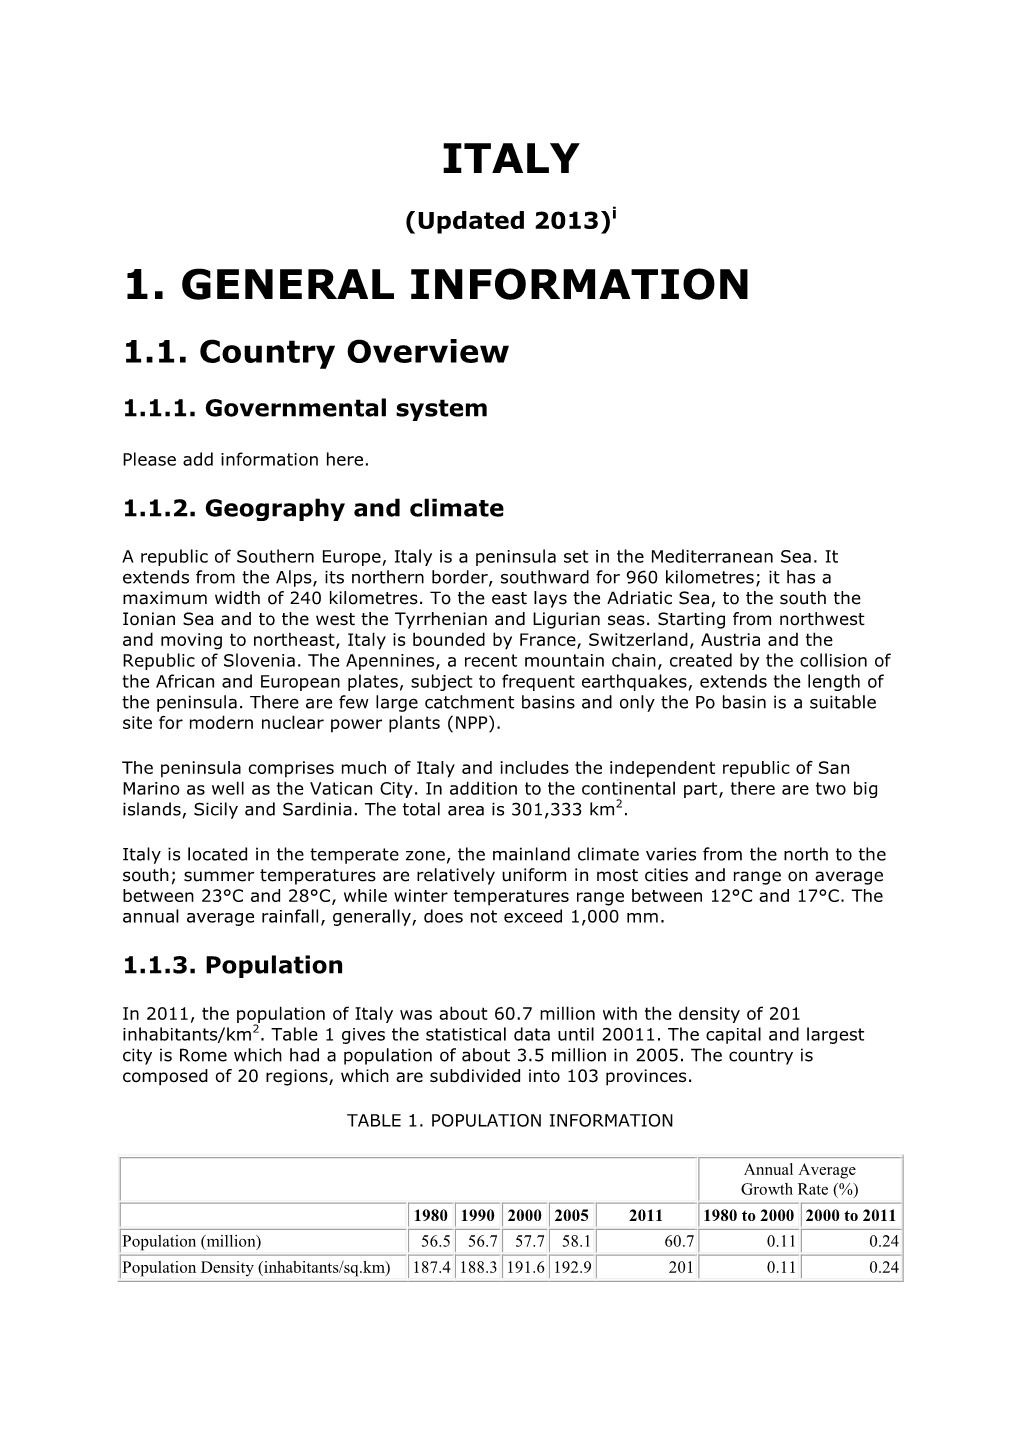 Italy 1. General Information